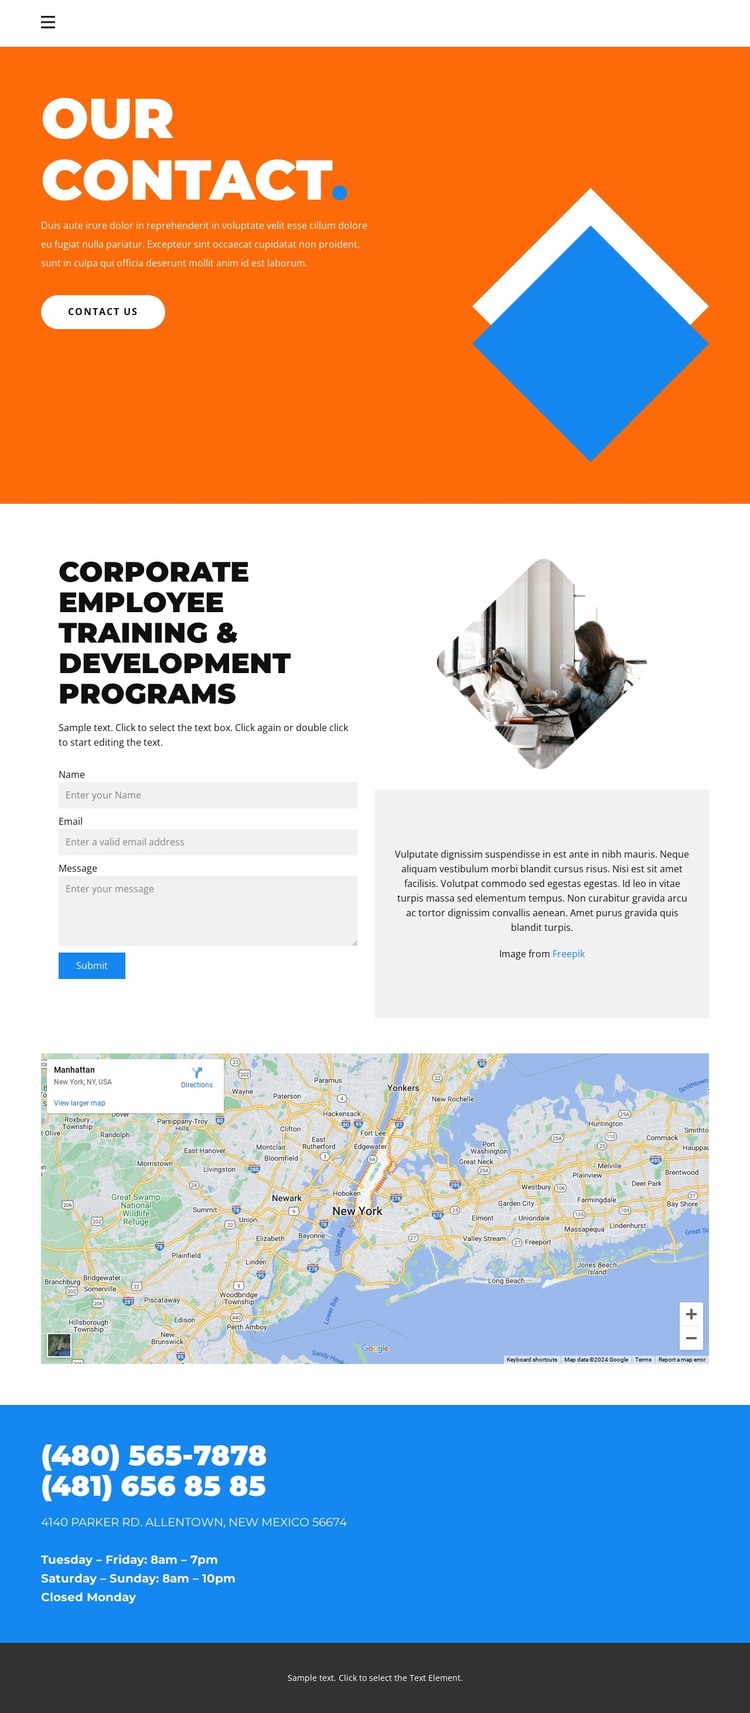 Design agency contacts WordPress Theme